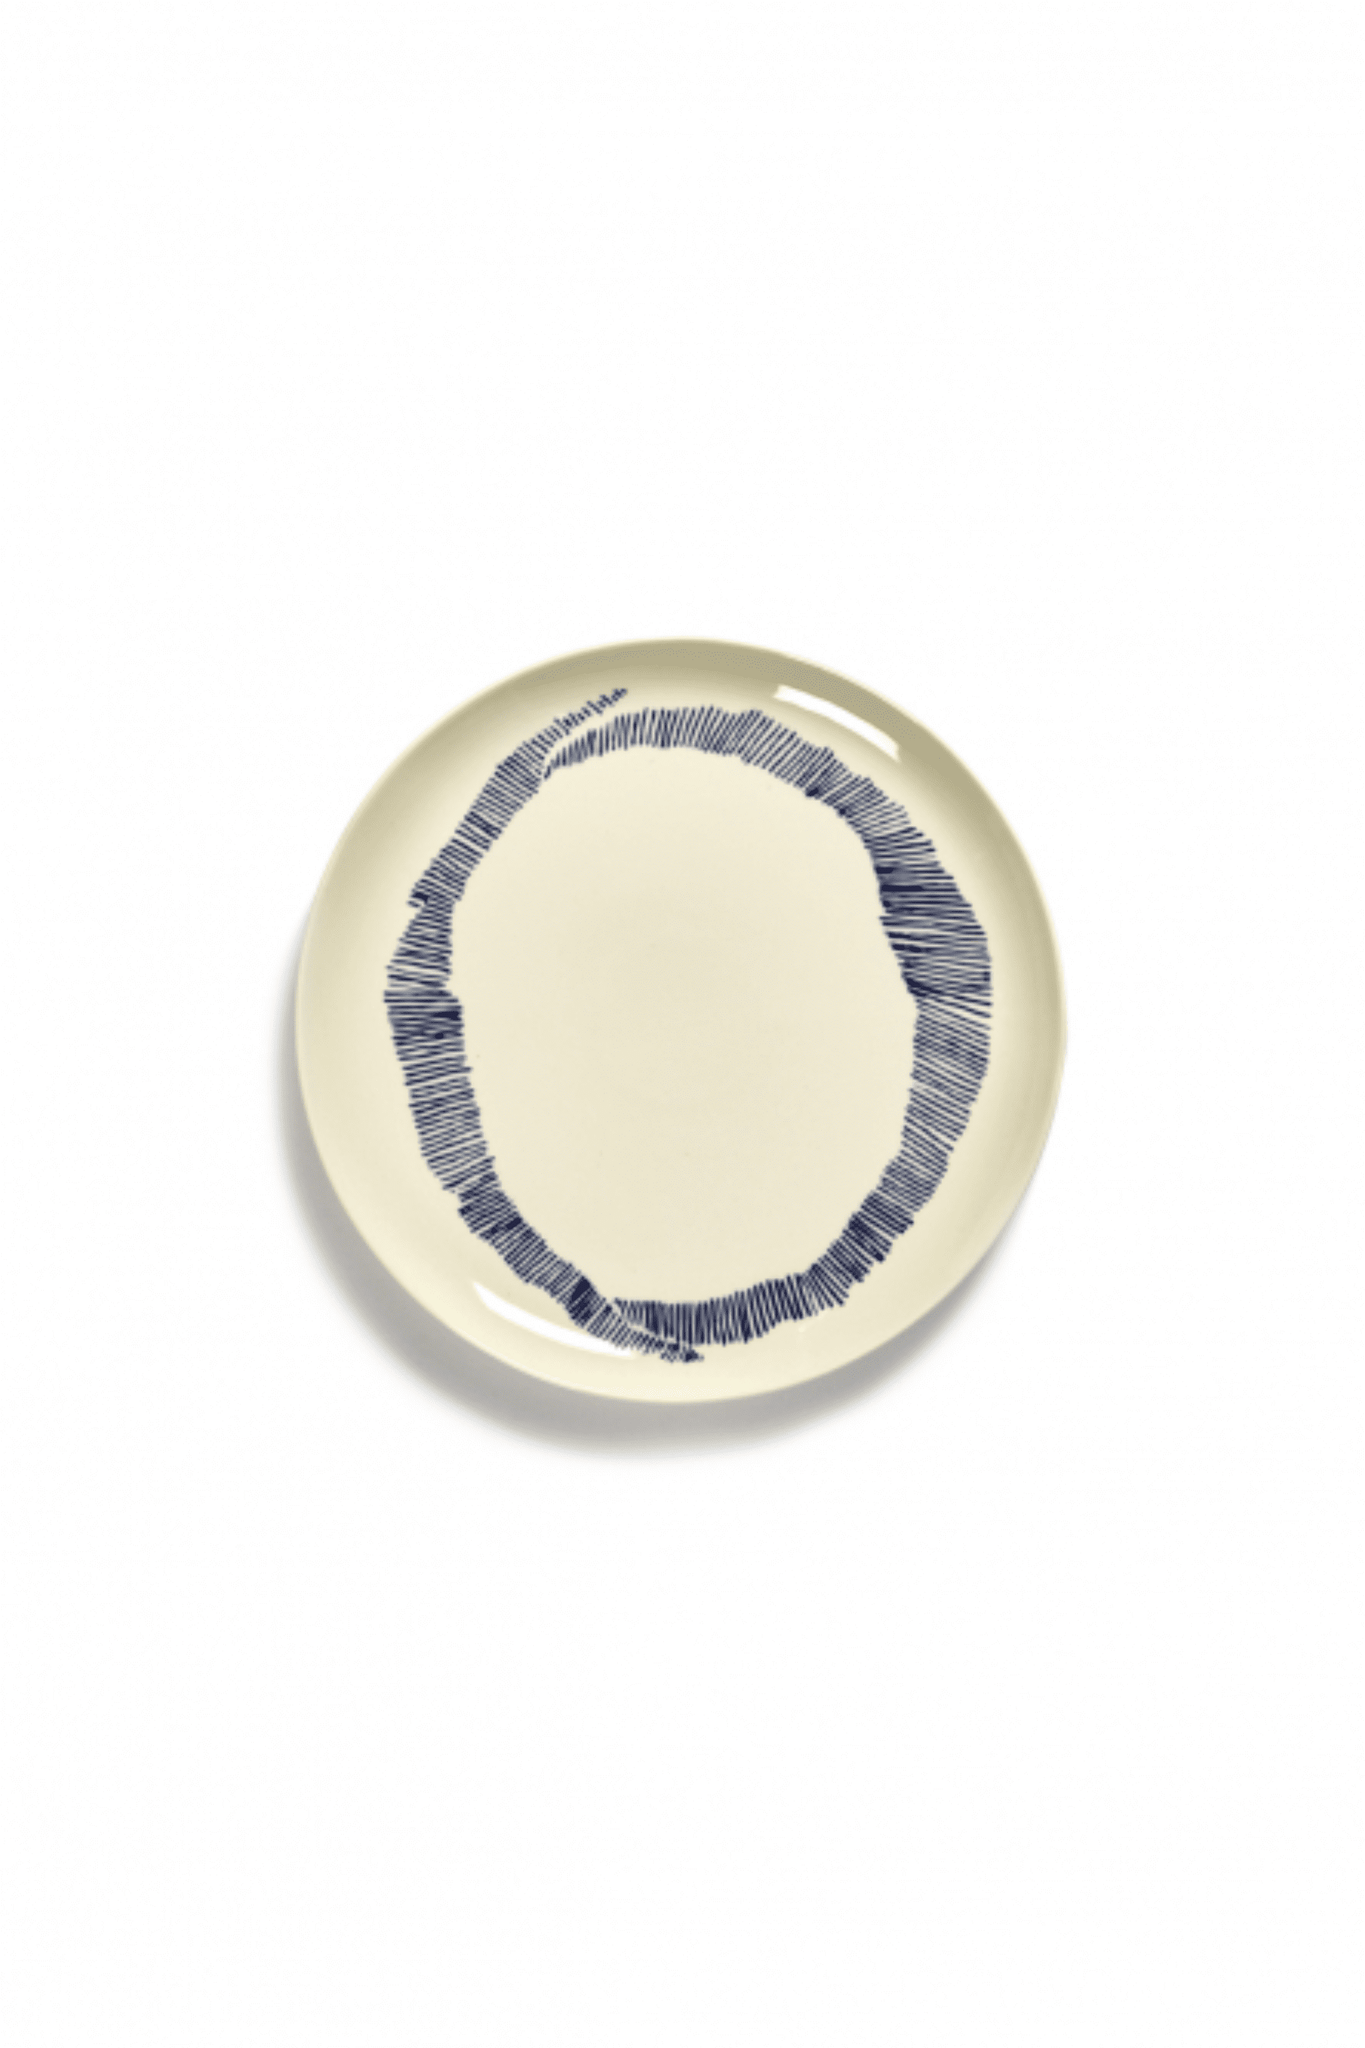 Set of 2 Large Plates, White Swirl with Blue Stripes Ottolenghi Serax, top view